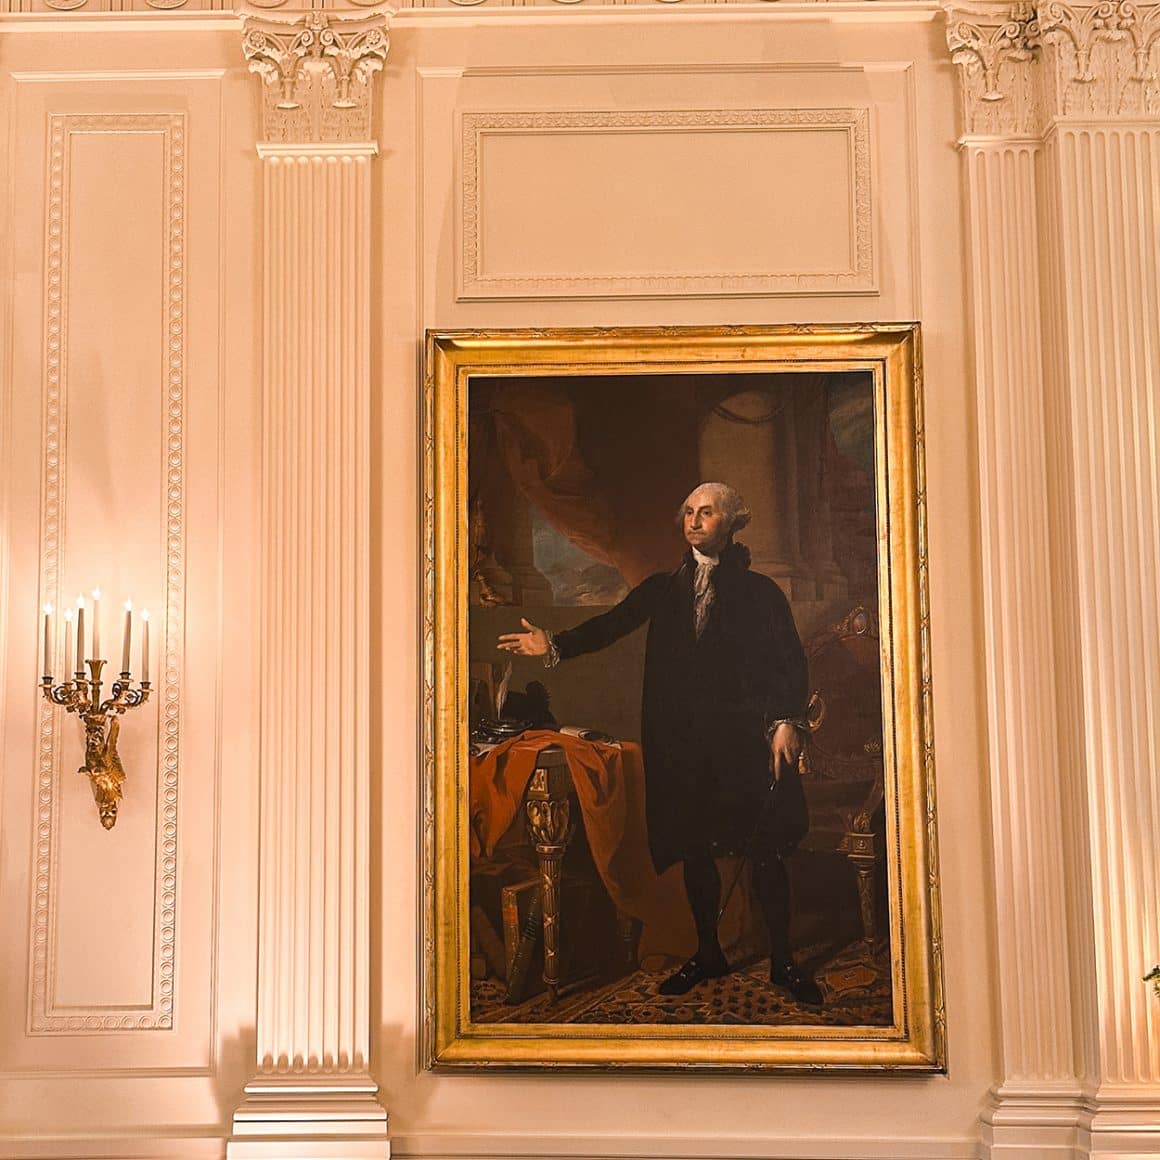 Portrait of George Washington in the White House Washington DC- photo by Keryn Means of DCTravelMag.com